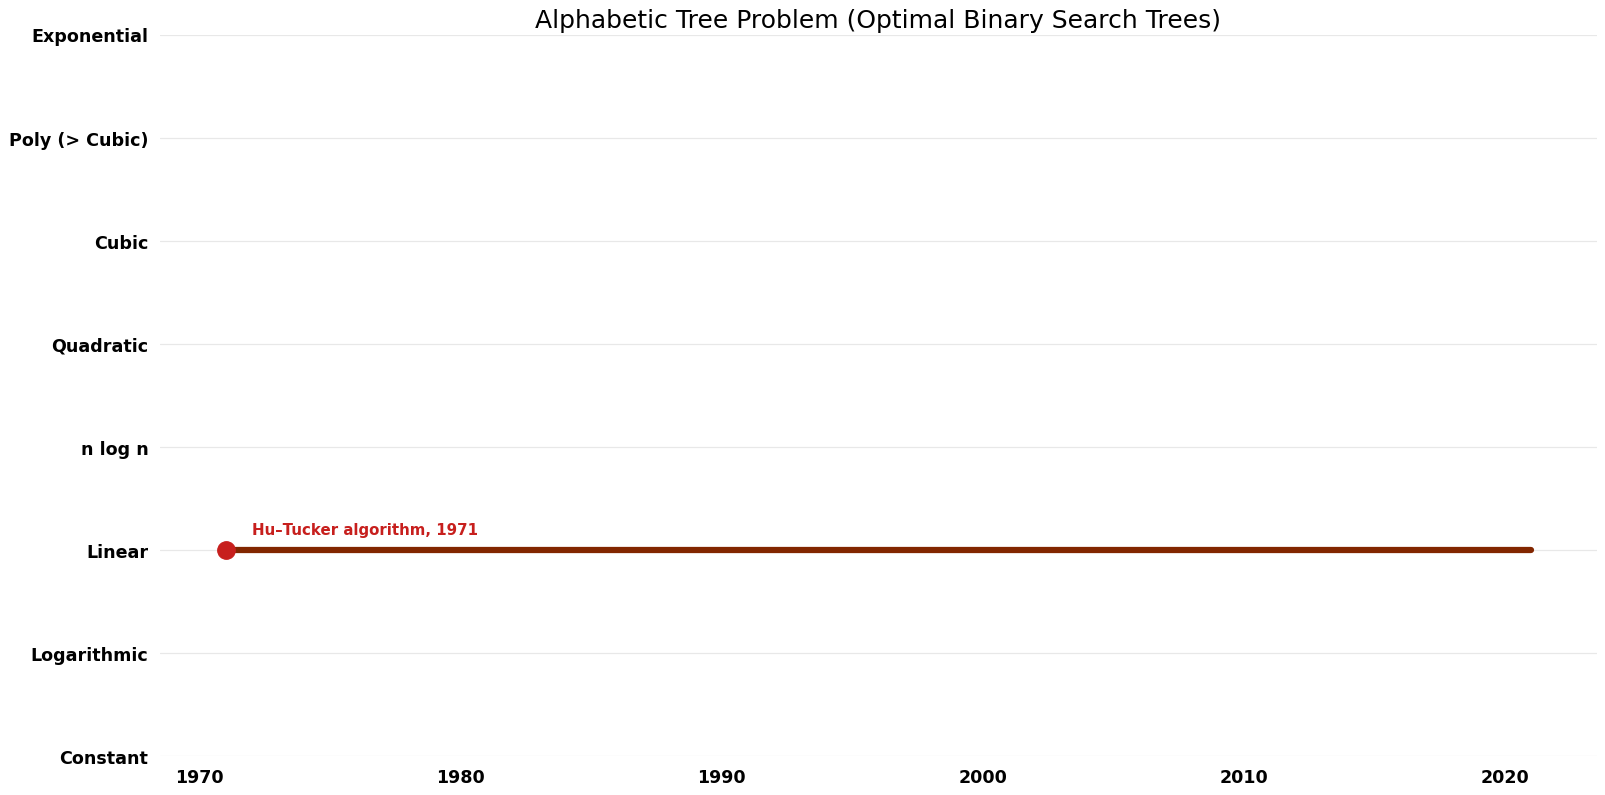 File:Optimal Binary Search Trees - Alphabetic Tree Problem - Space.png